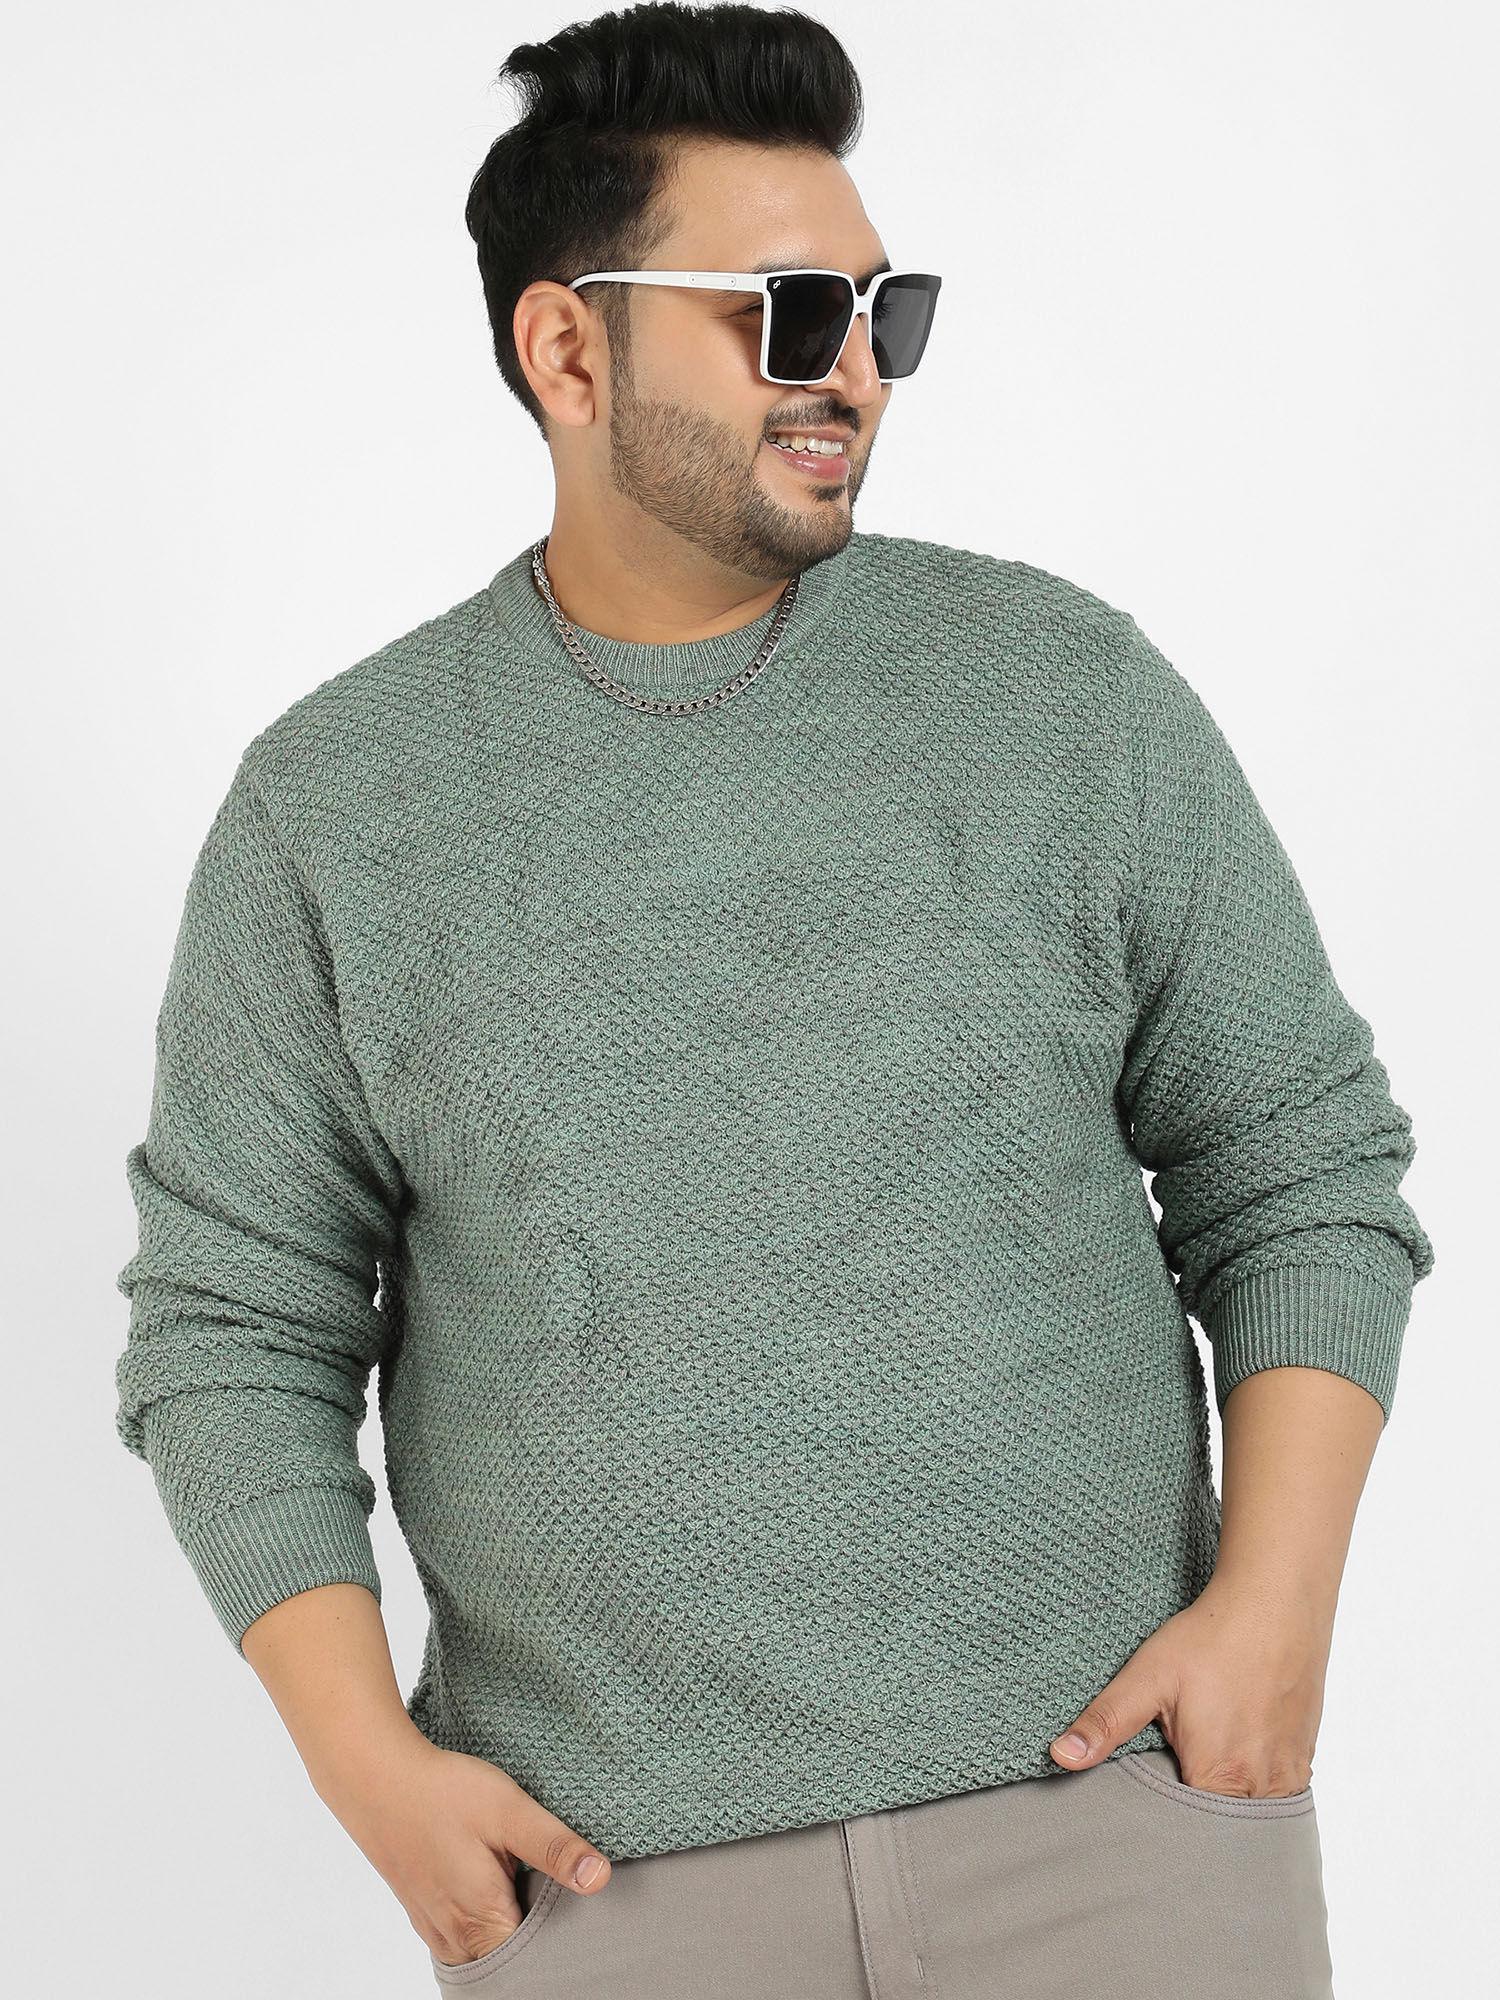 men-olive-green-textured-knit-pullover-sweater